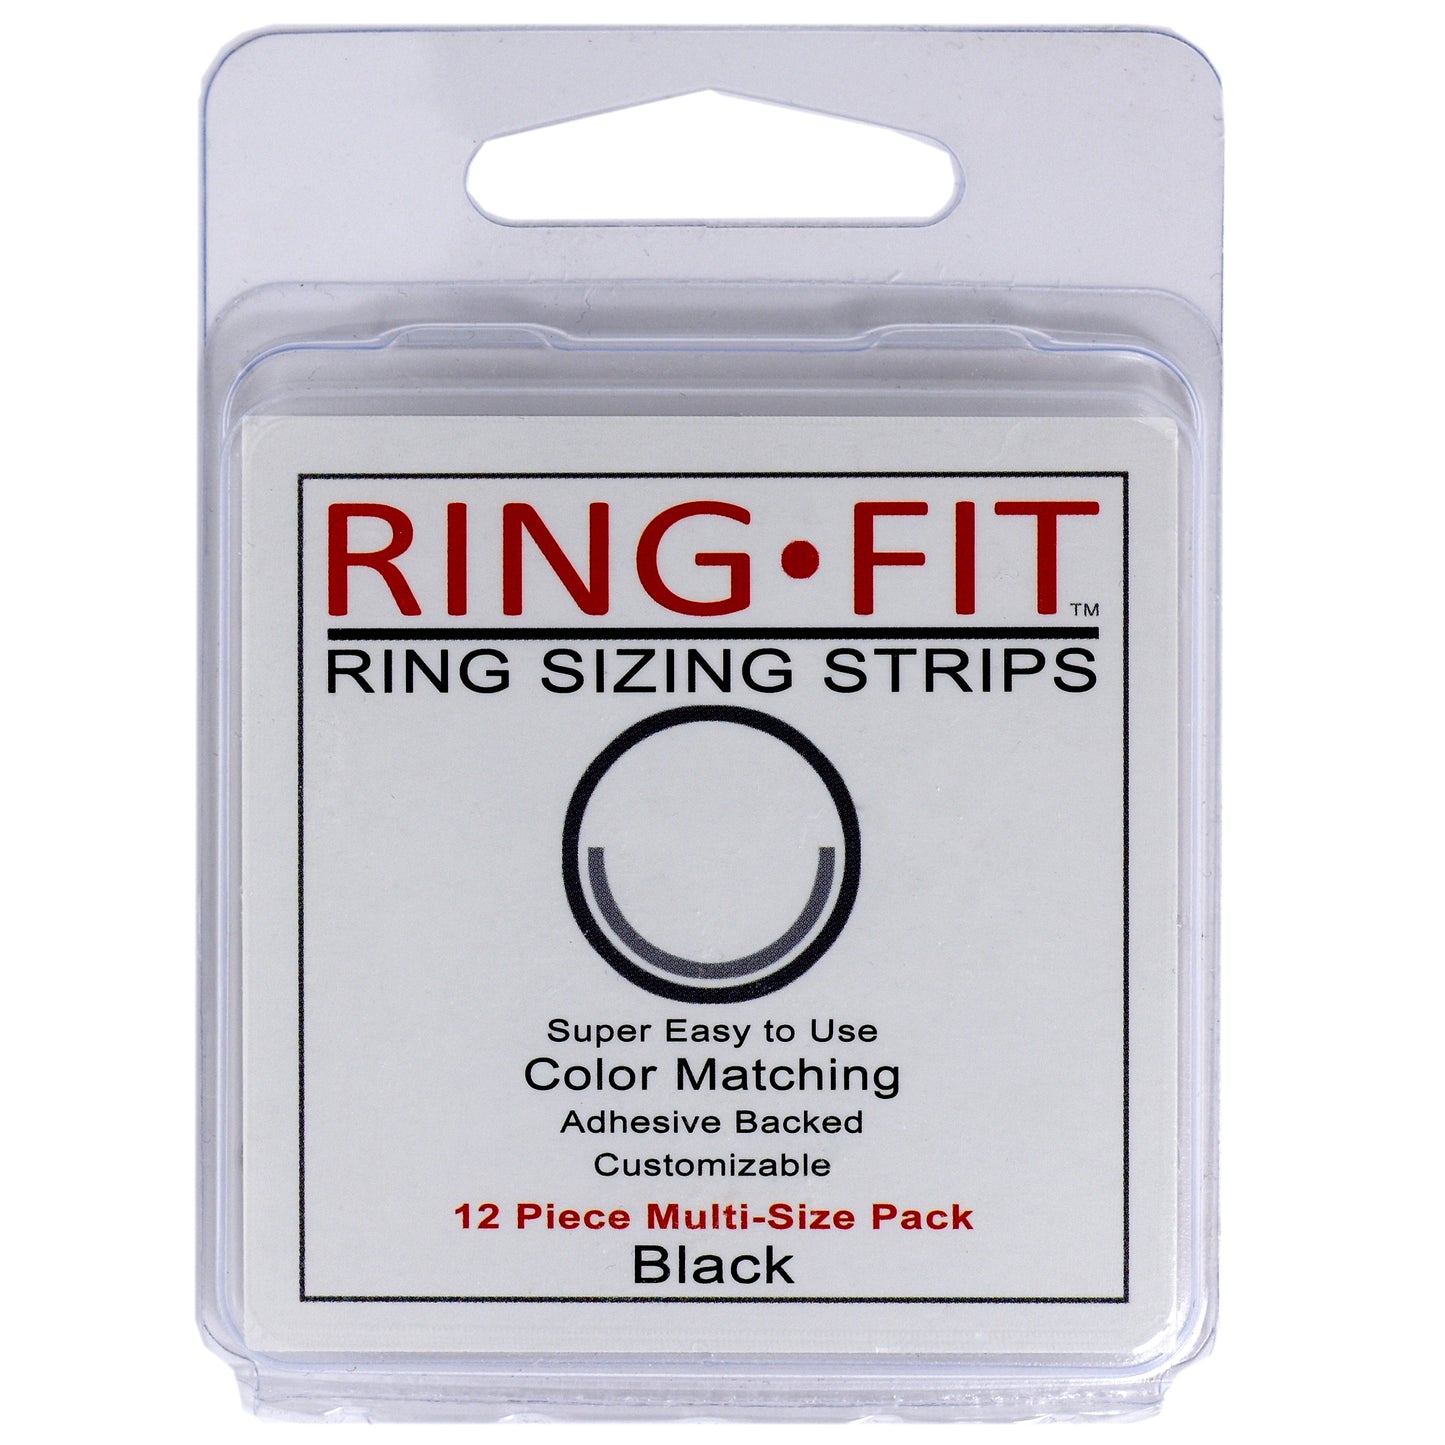 Ring-Fit Ring Sizing Strips for WIDE Rings (wider than 3mm)